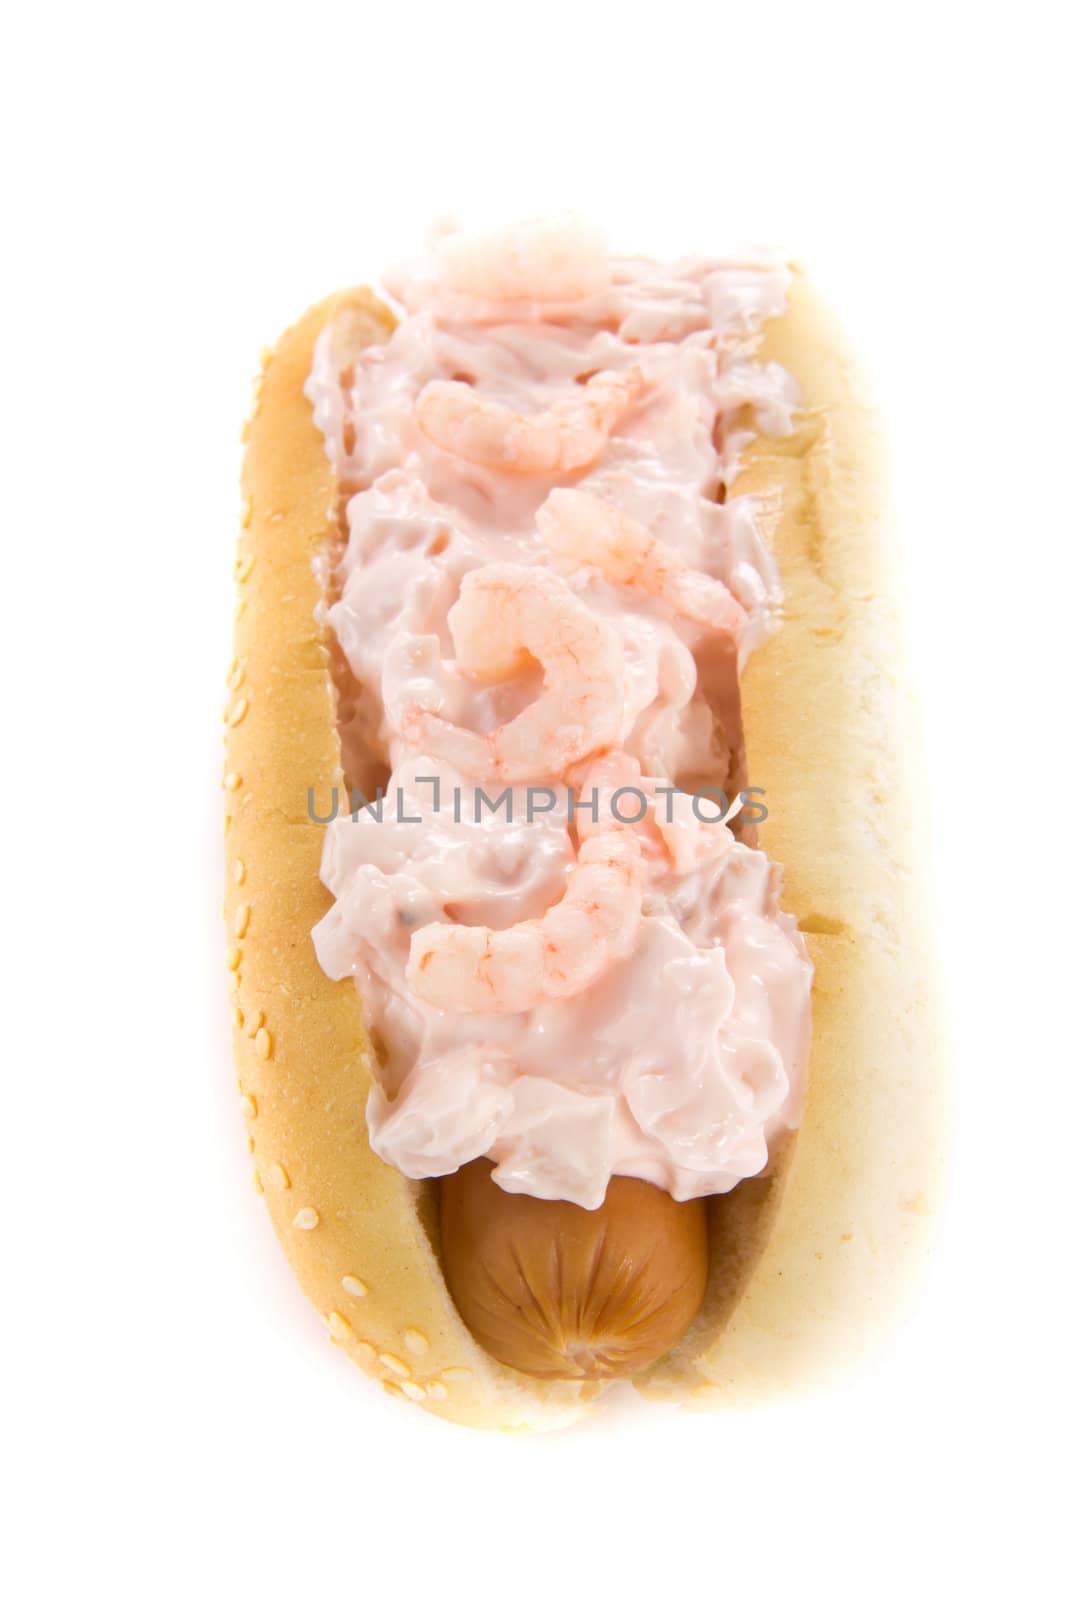 A picture of a hotdog with shrimp salad on top